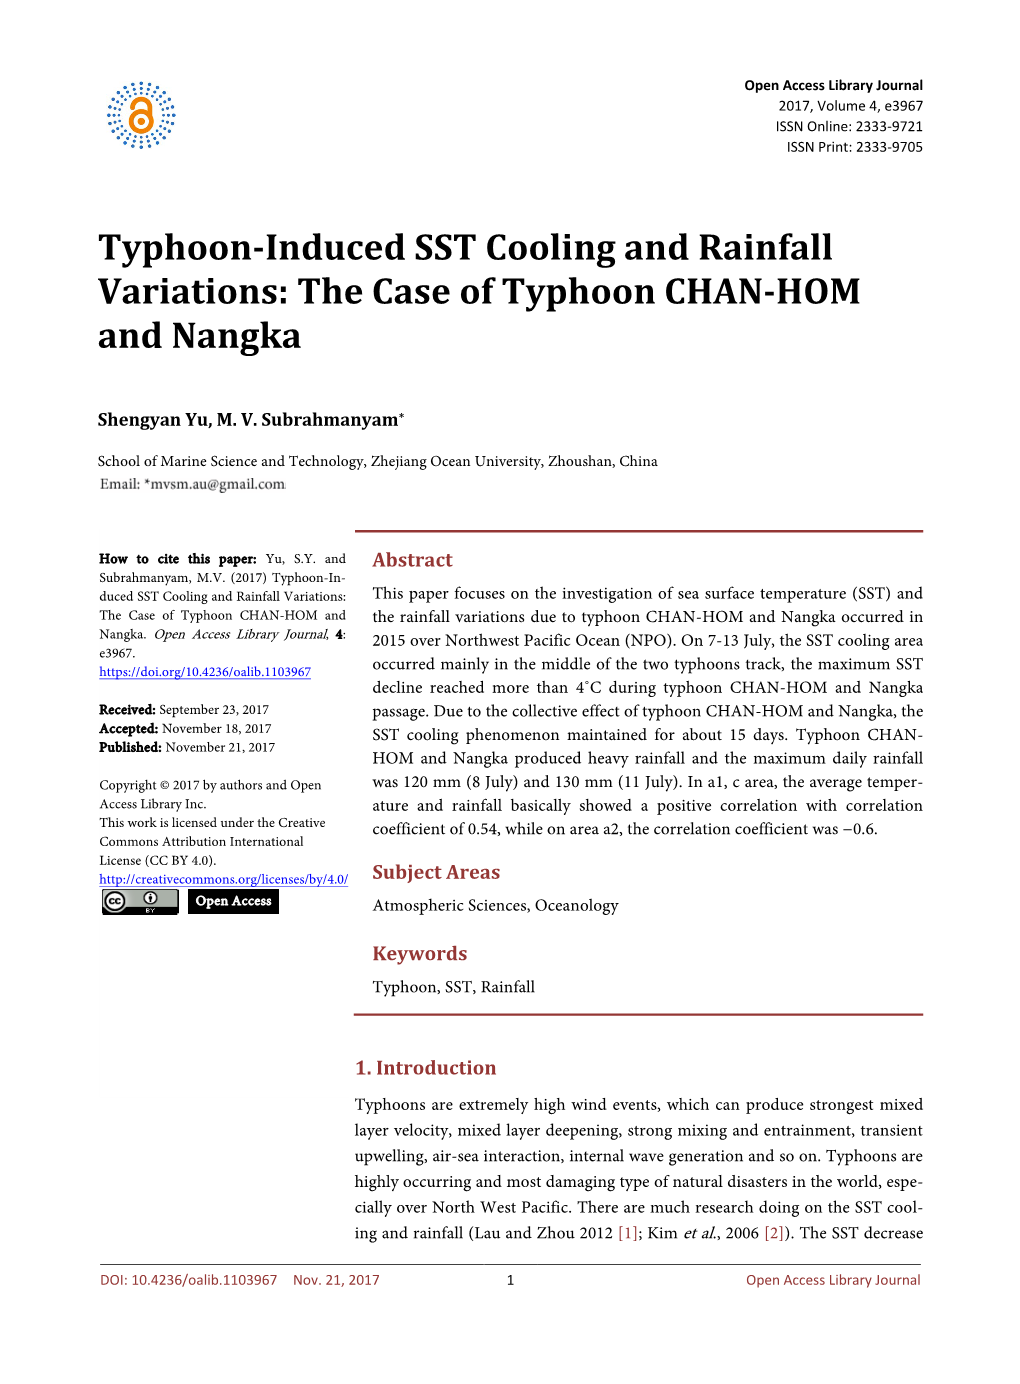 Typhoon-Induced SST Cooling and Rainfall Variations: the Case of Typhoon CHAN-HOM and Nangka